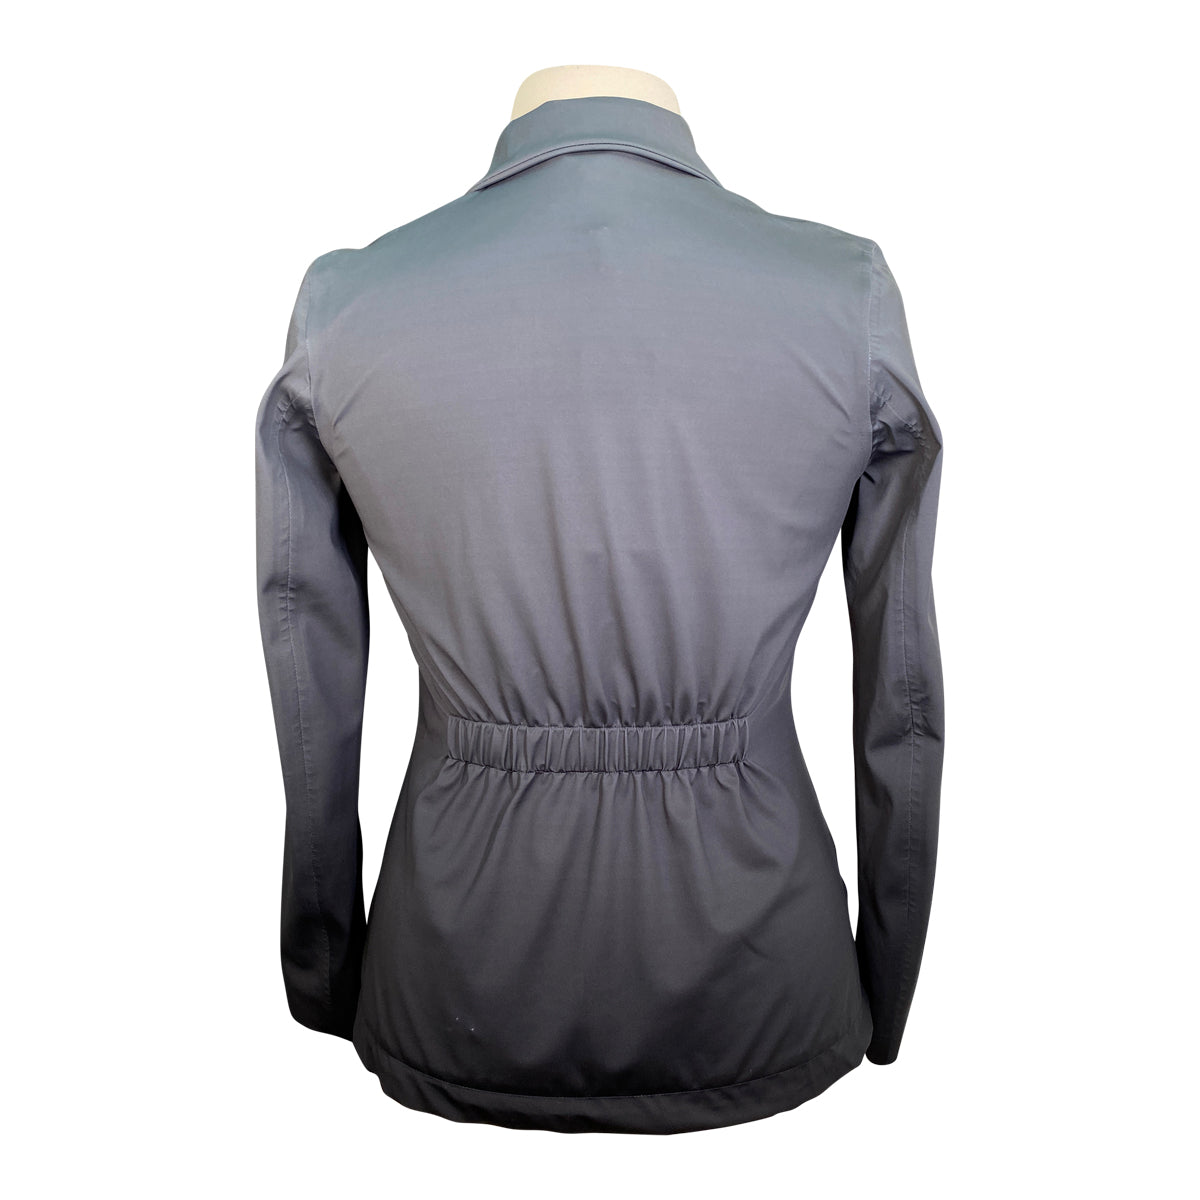 Animo 'Lugo' Competition Jacket in Black Ombre